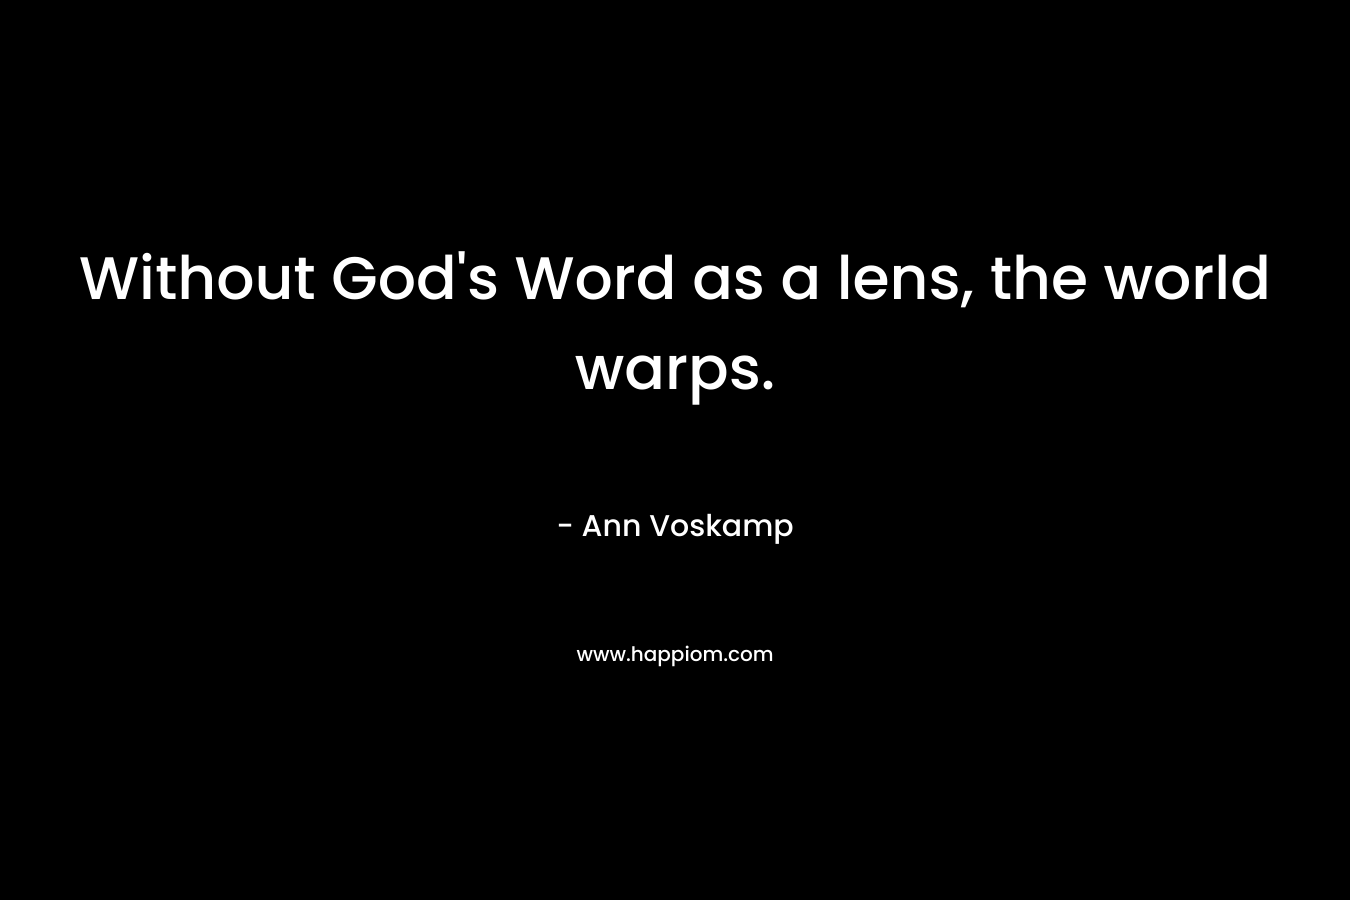 Without God's Word as a lens, the world warps.